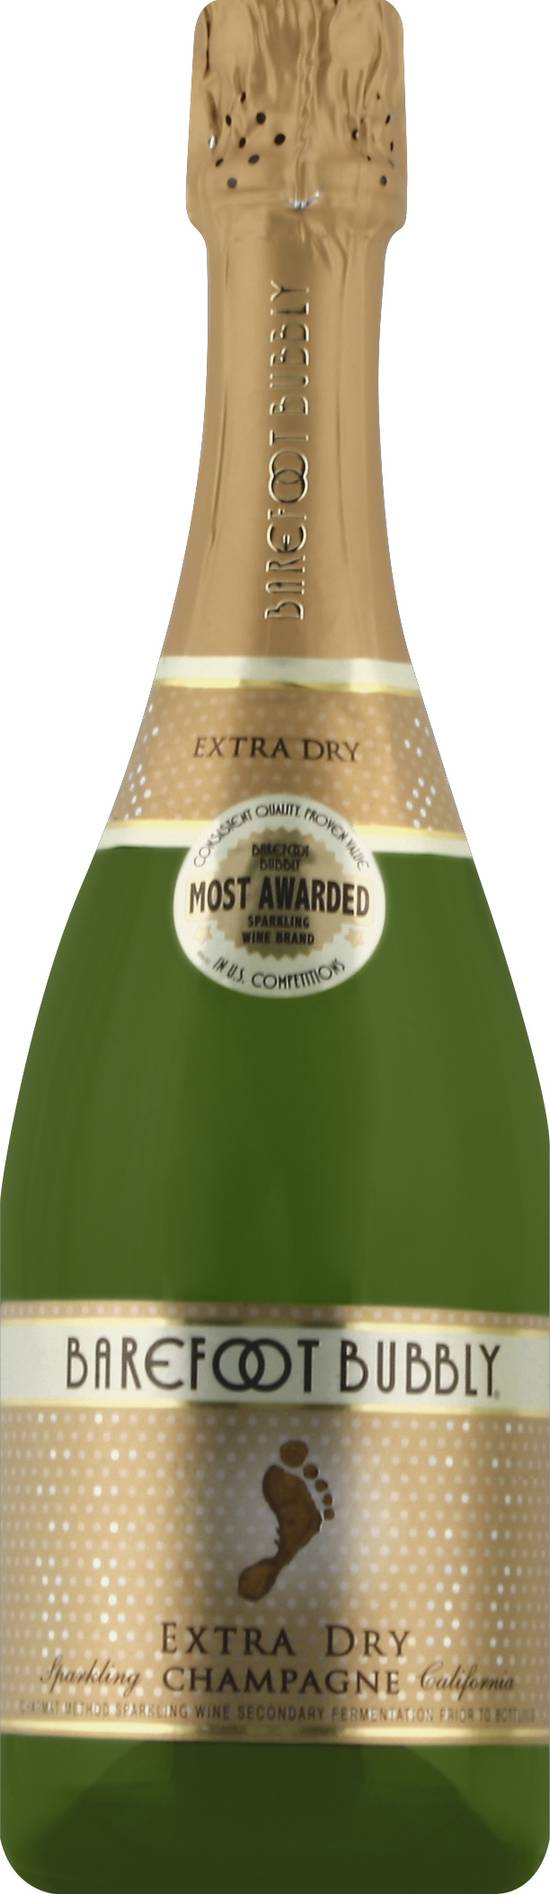 Barefoot Sparkling California Extra Dry Champagne (750 ml)